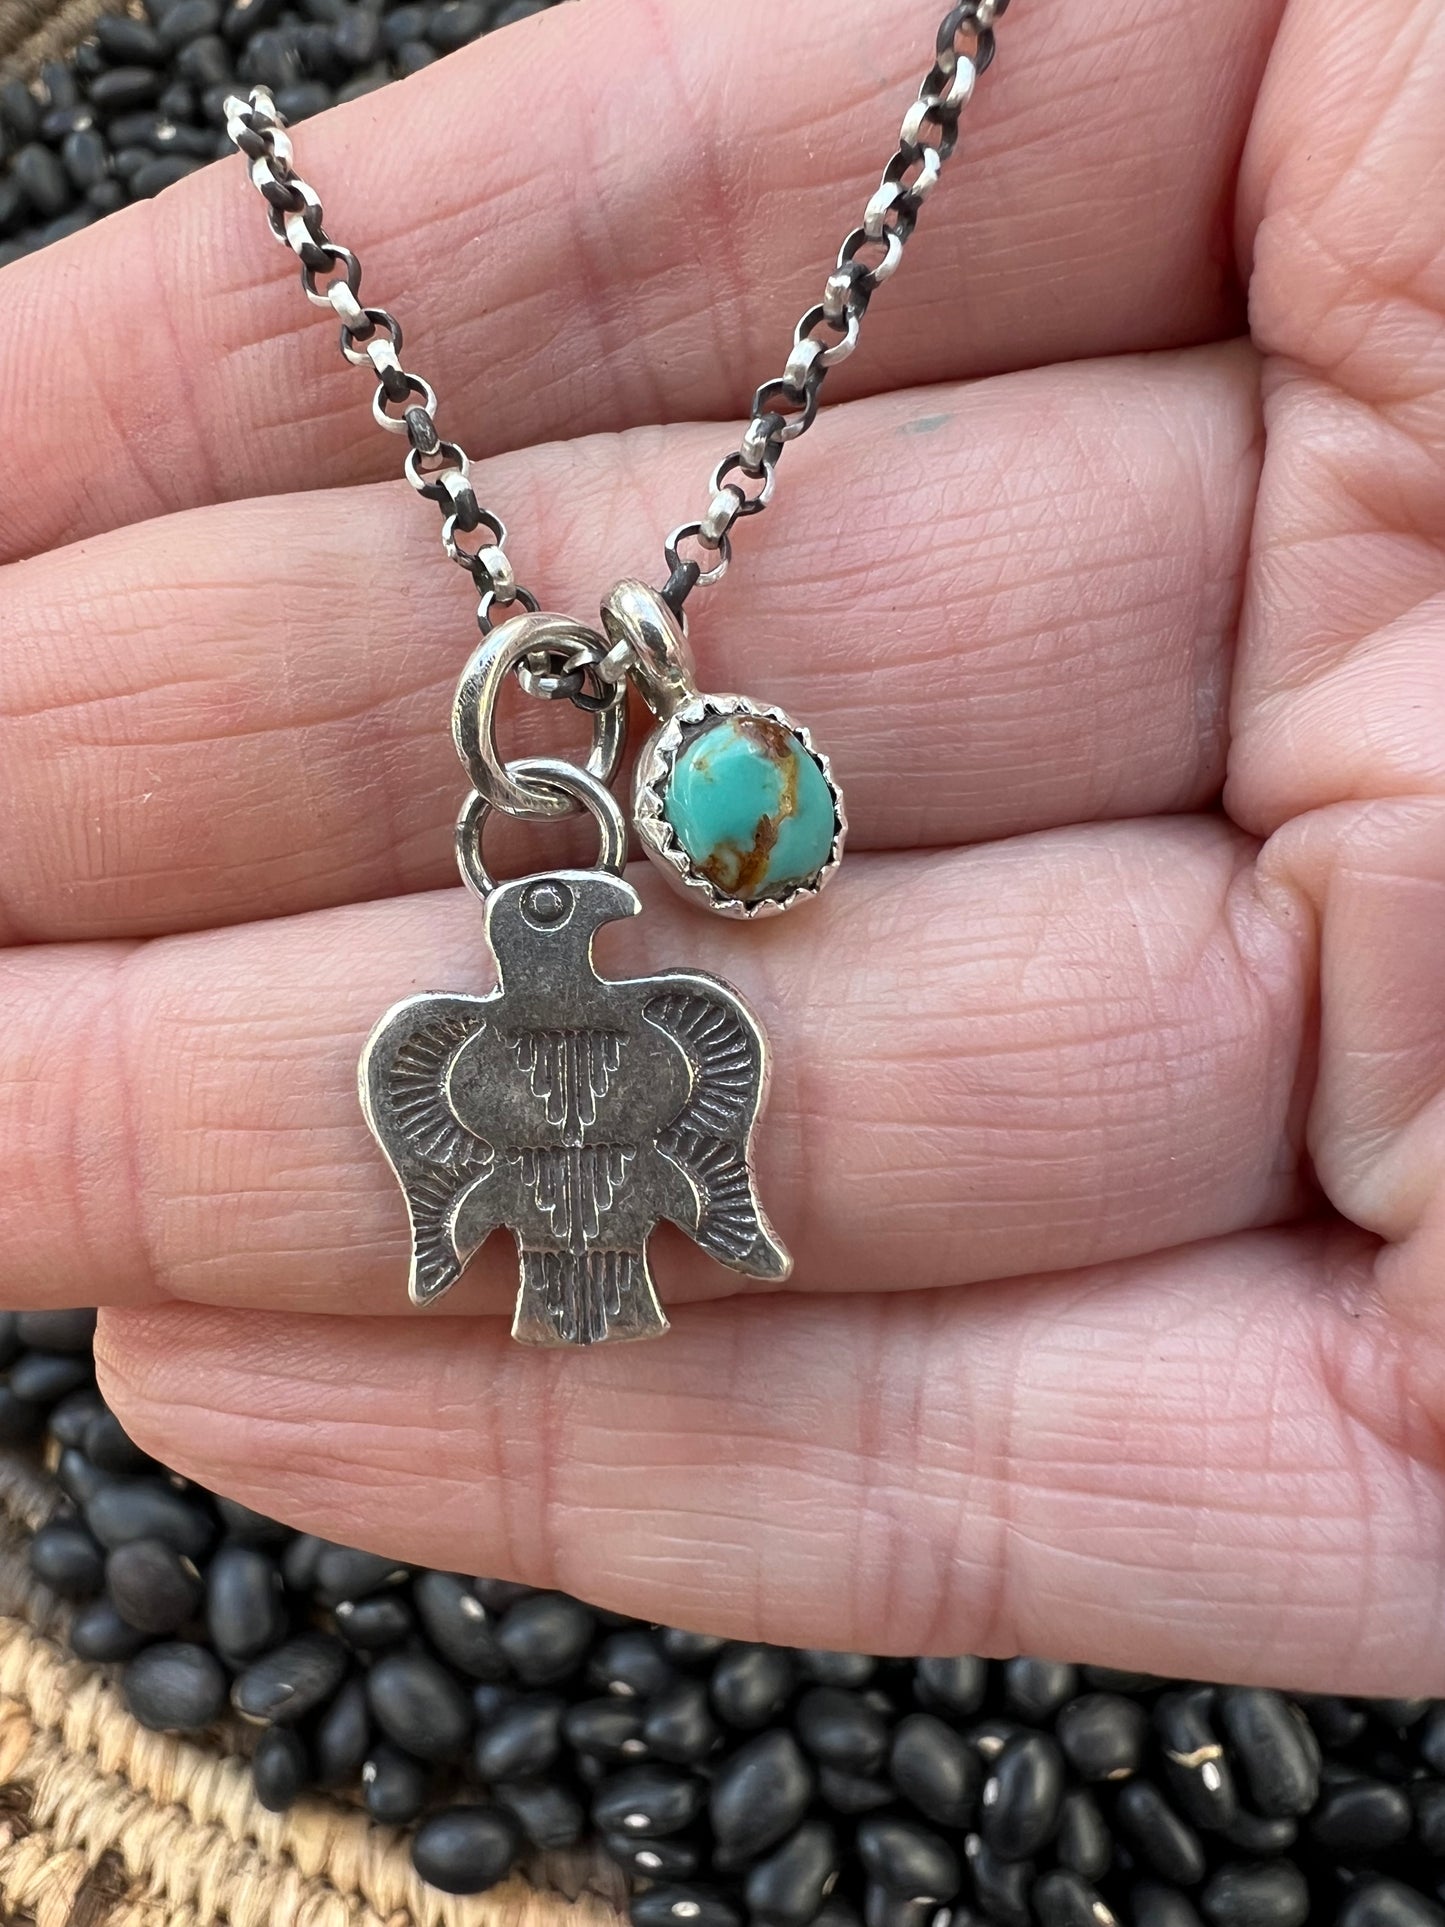 Turquoise Handstamped Charm Necklace